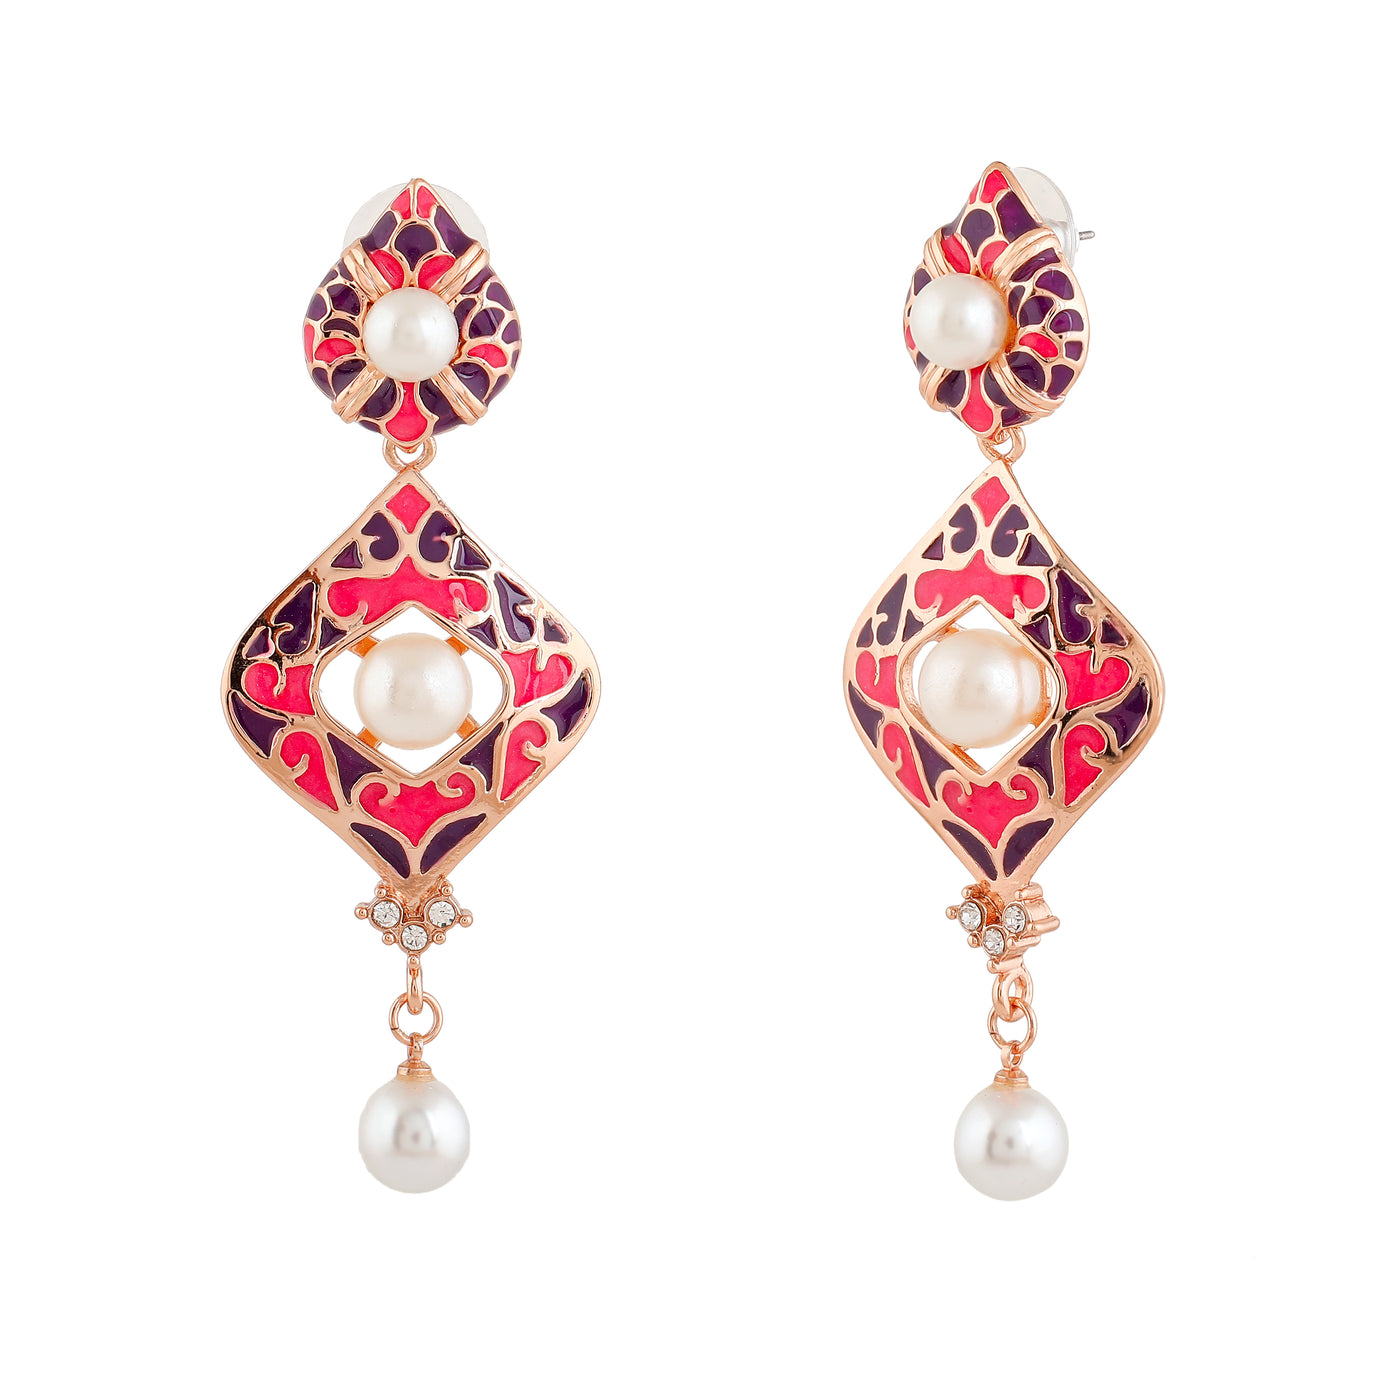 Estele Rose Gold Plated Beautiful Drop Earrings with White Pearls for Women